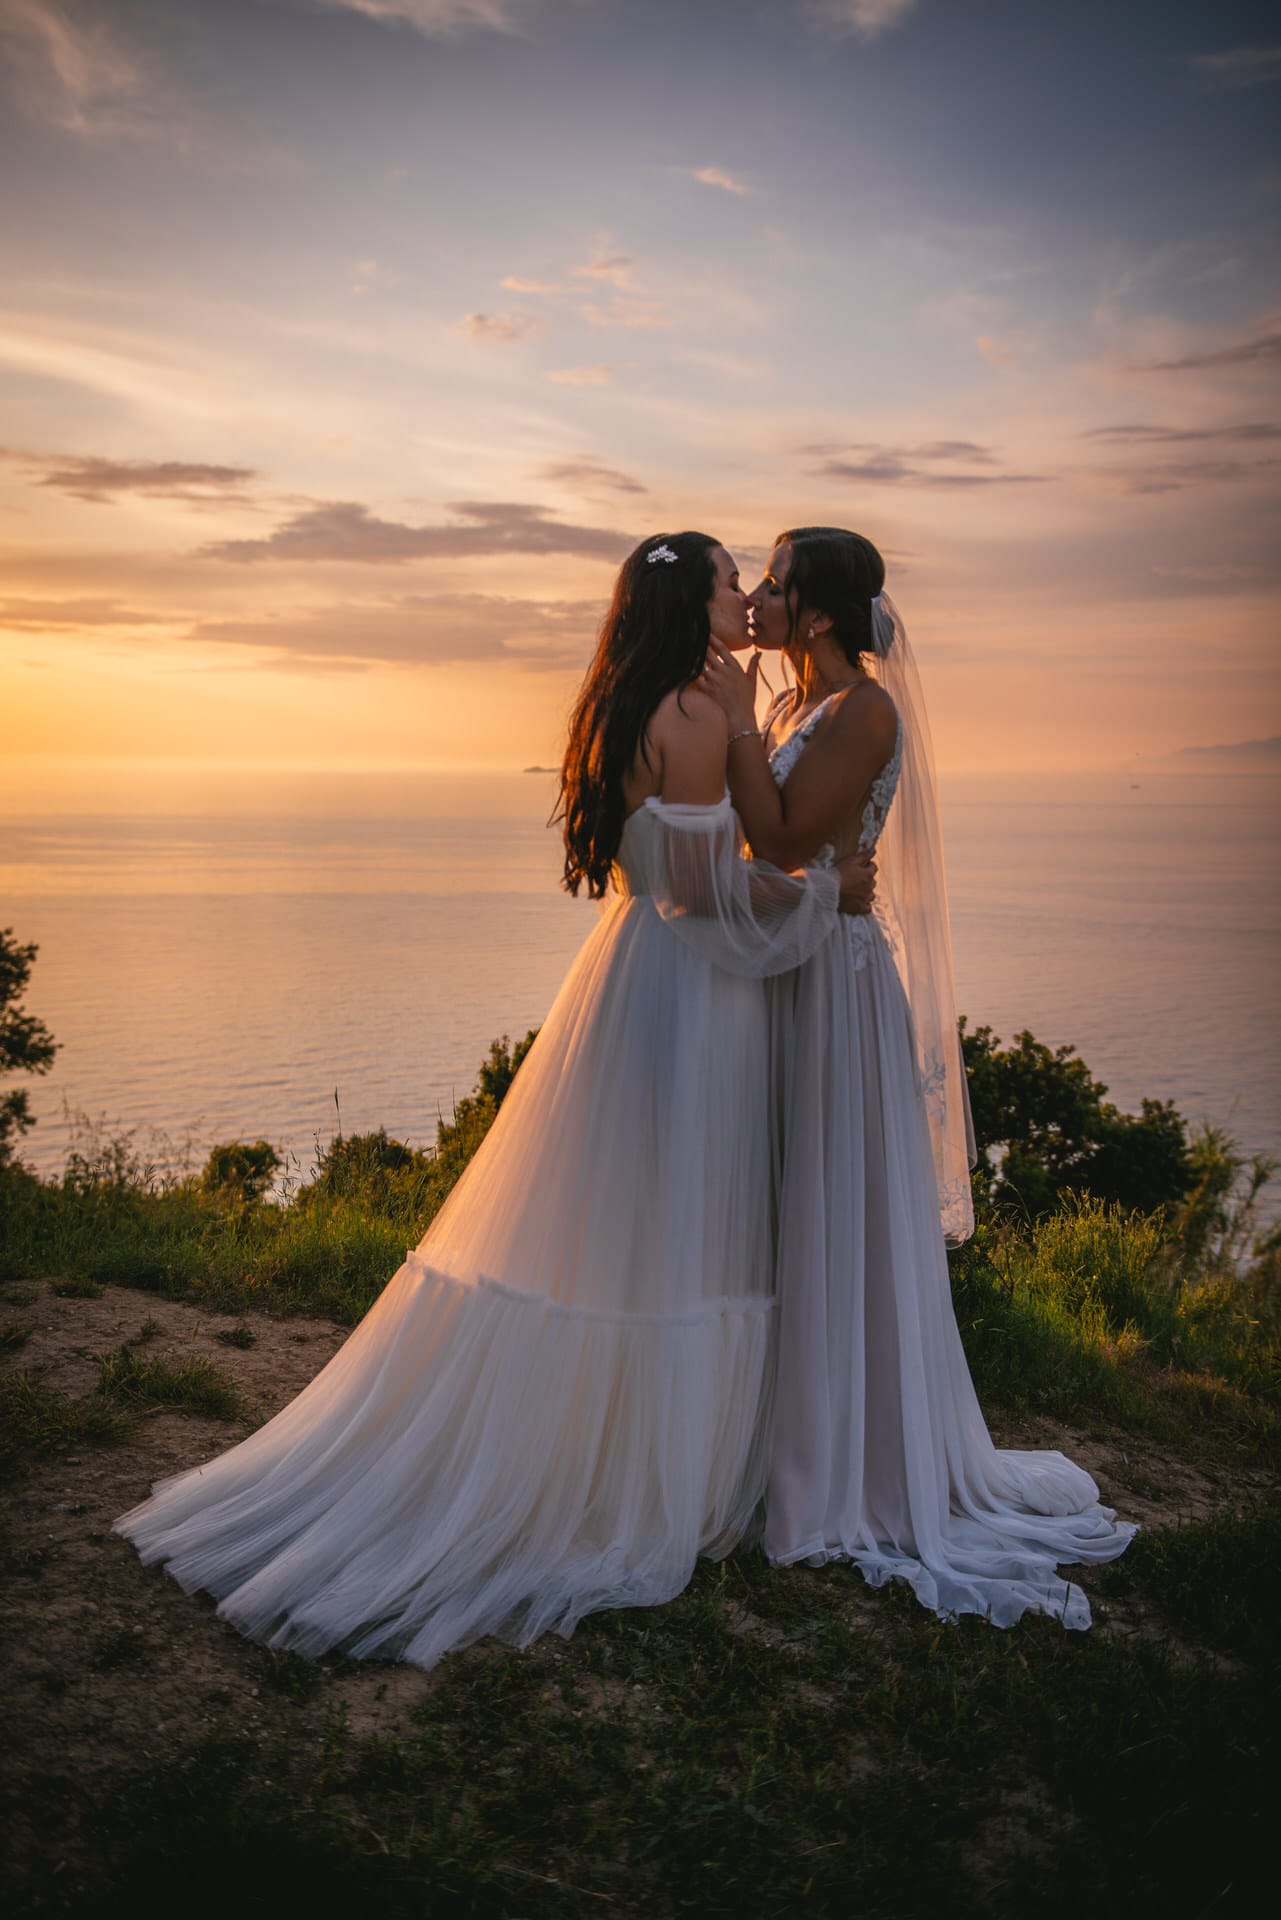 Brides sharing a loving kiss under the sunset, a romantic scene in Corfu elopement.